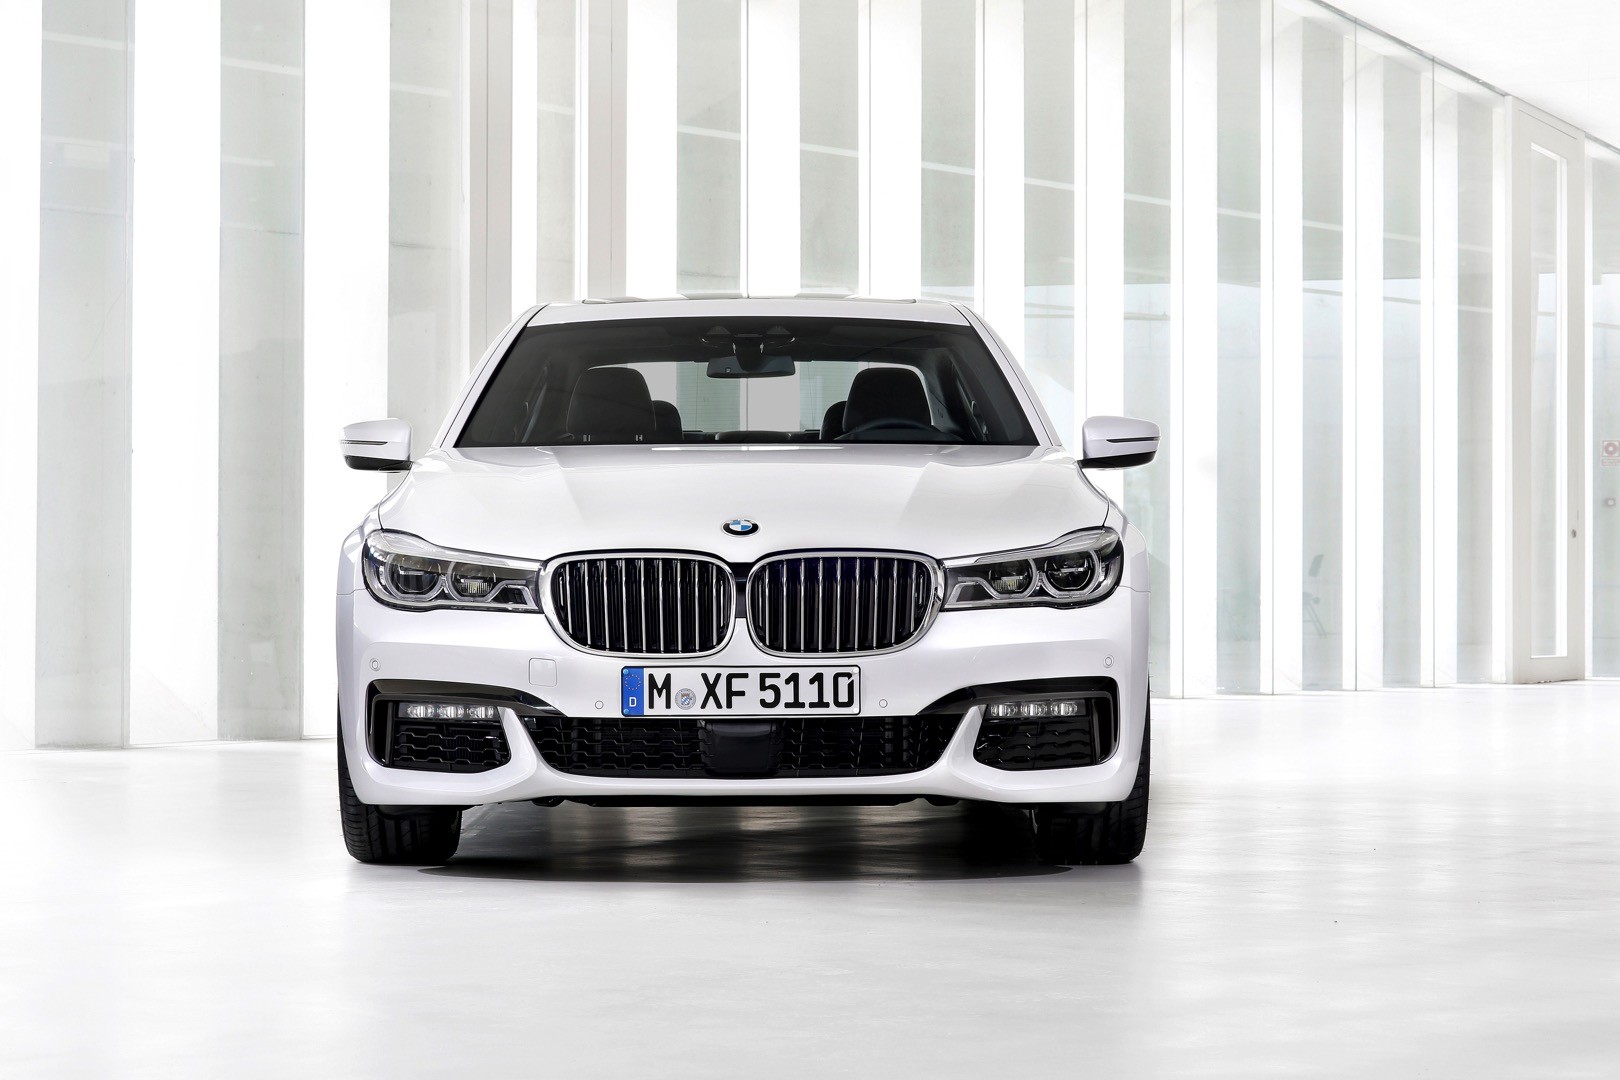 2016-bmw-7-series-finally-officially-unveiled-the-good-stuffs-inside-photo-gallery_56